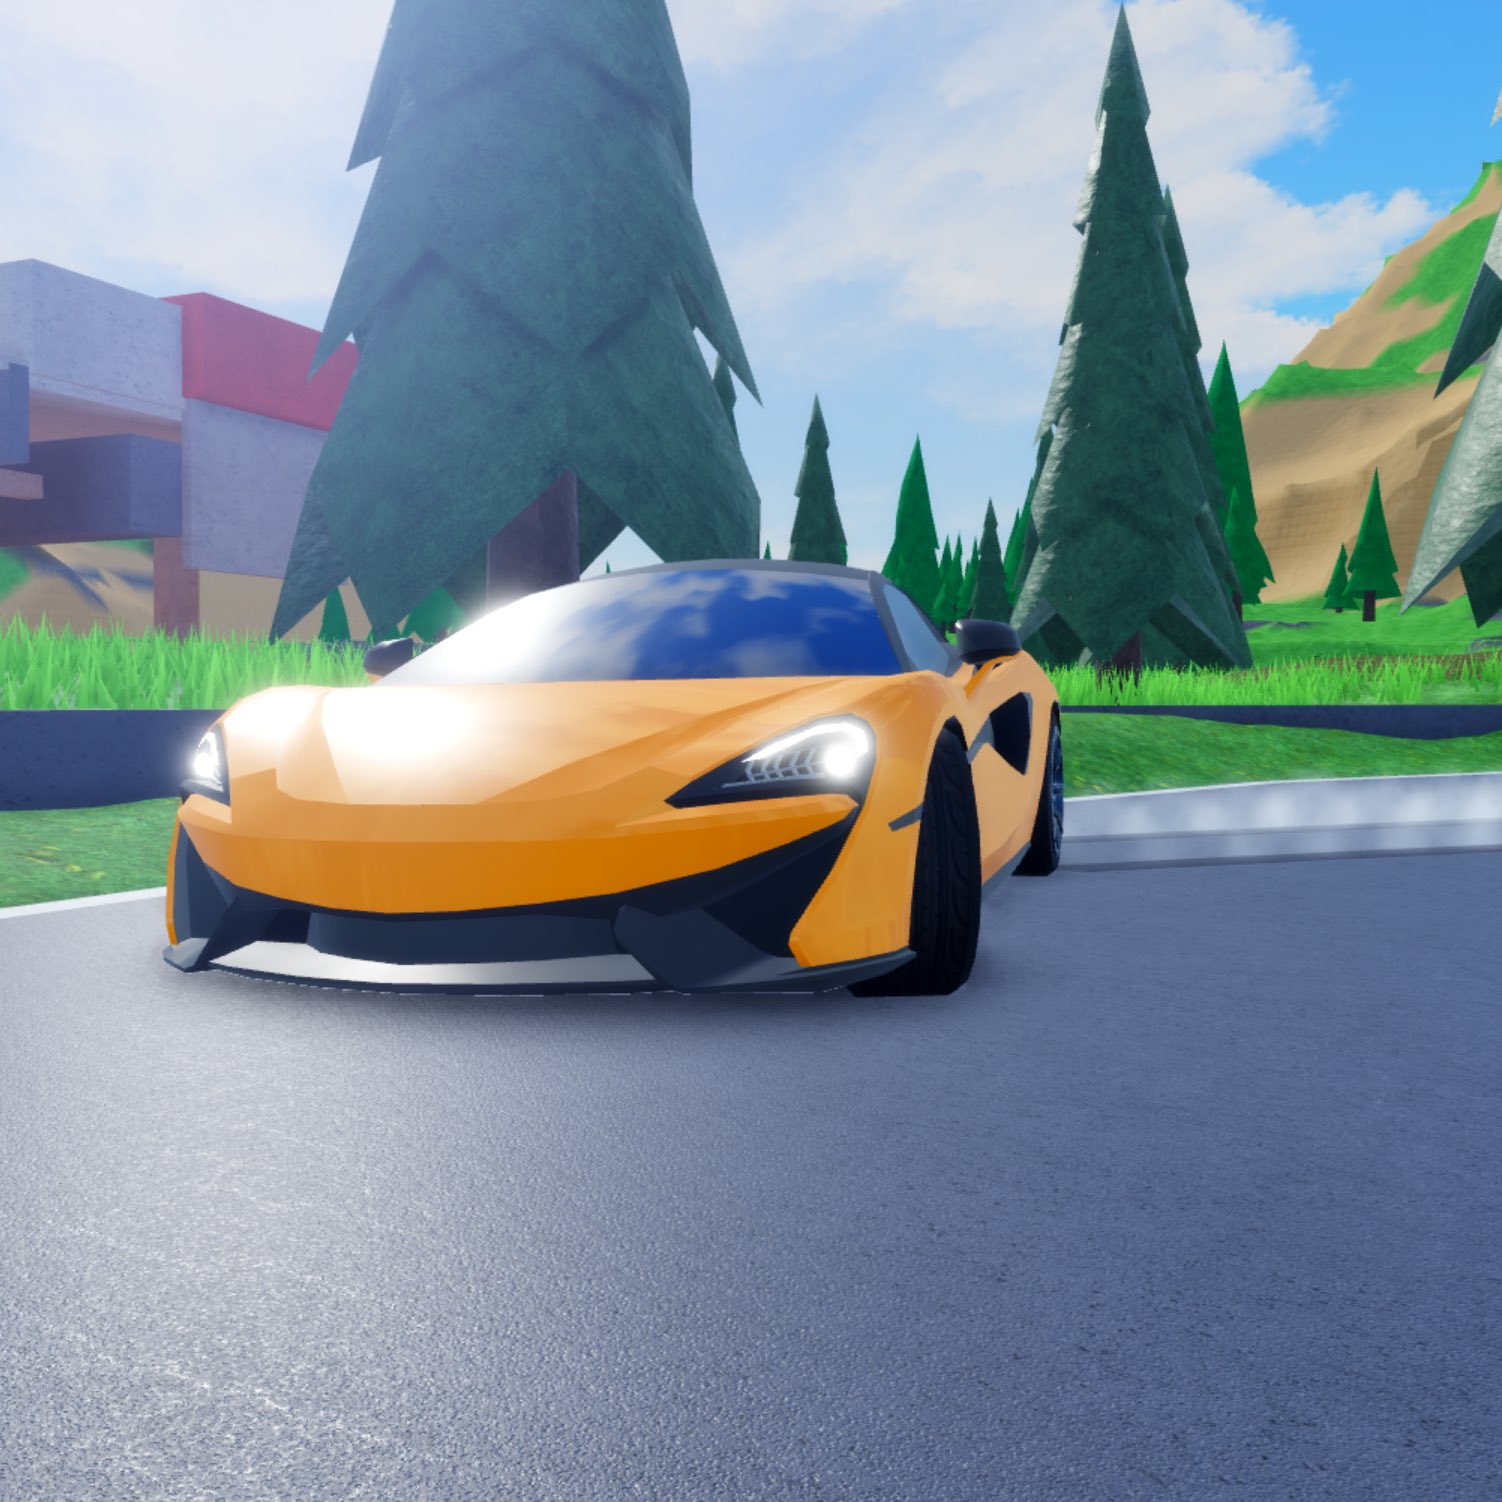 Robloxian High School On Twitter What Did You Do This Weekend We Spent Our Weekend Racing Our New Aero Gt Uncompromising Speed Unbelievably Good Looking And Only 500 Gems Get Yours Today Https T Co X7rockk7xp Roblox - robloxian highschool on twitter fellow robloxians were